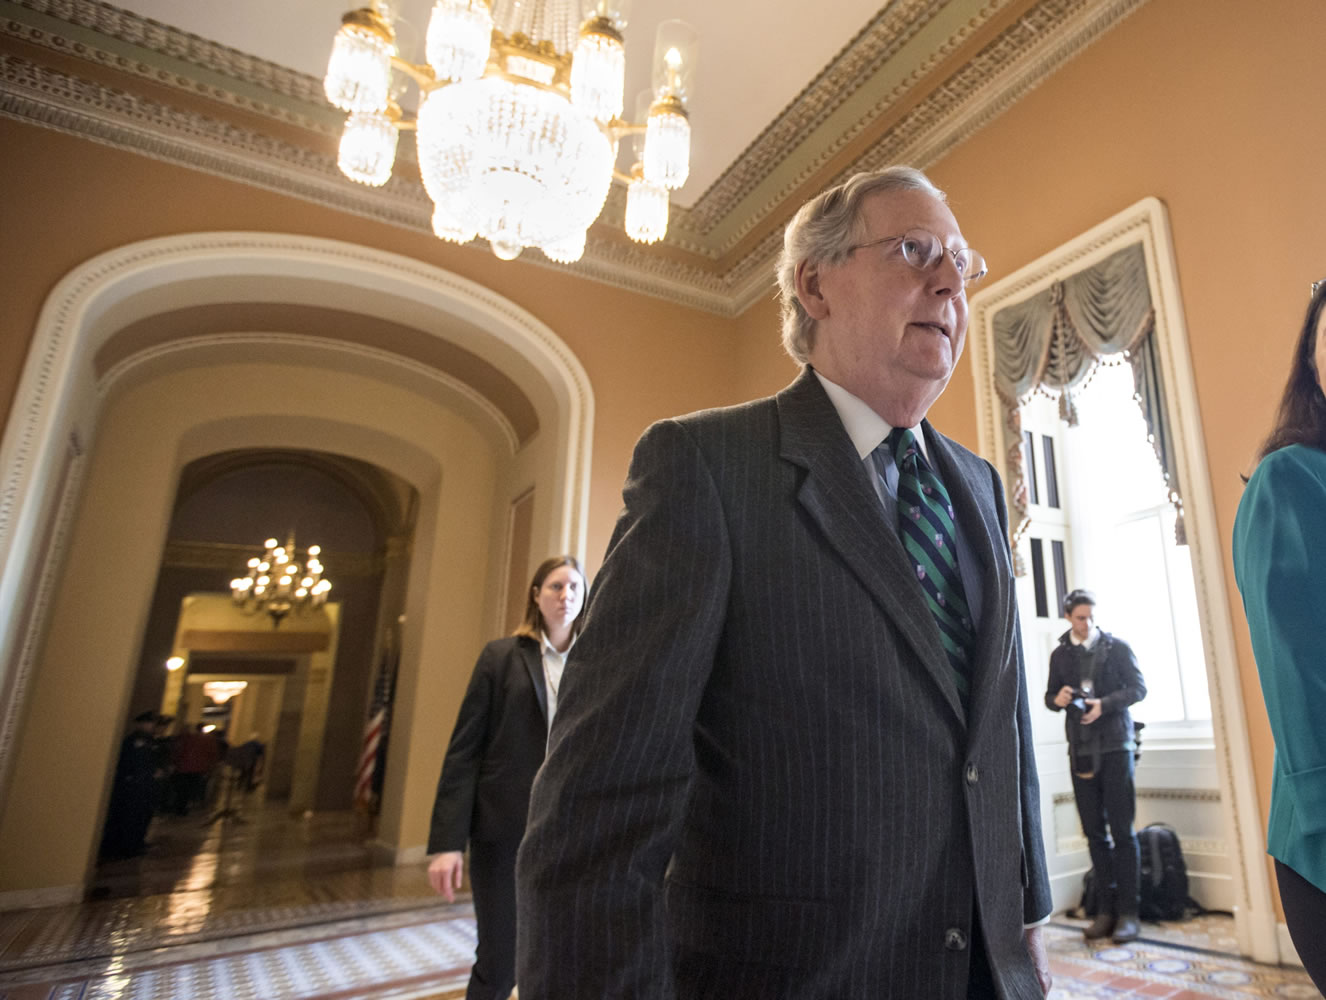 Senate Majority Leader Mitch McConnell walks to the chamber where he offered a tribute to the late Supreme Court Justice Antonin Scalia whose death has triggered an election-year political standoff, on Capitol Hill in Washington on Monday.(AP Photo/J.